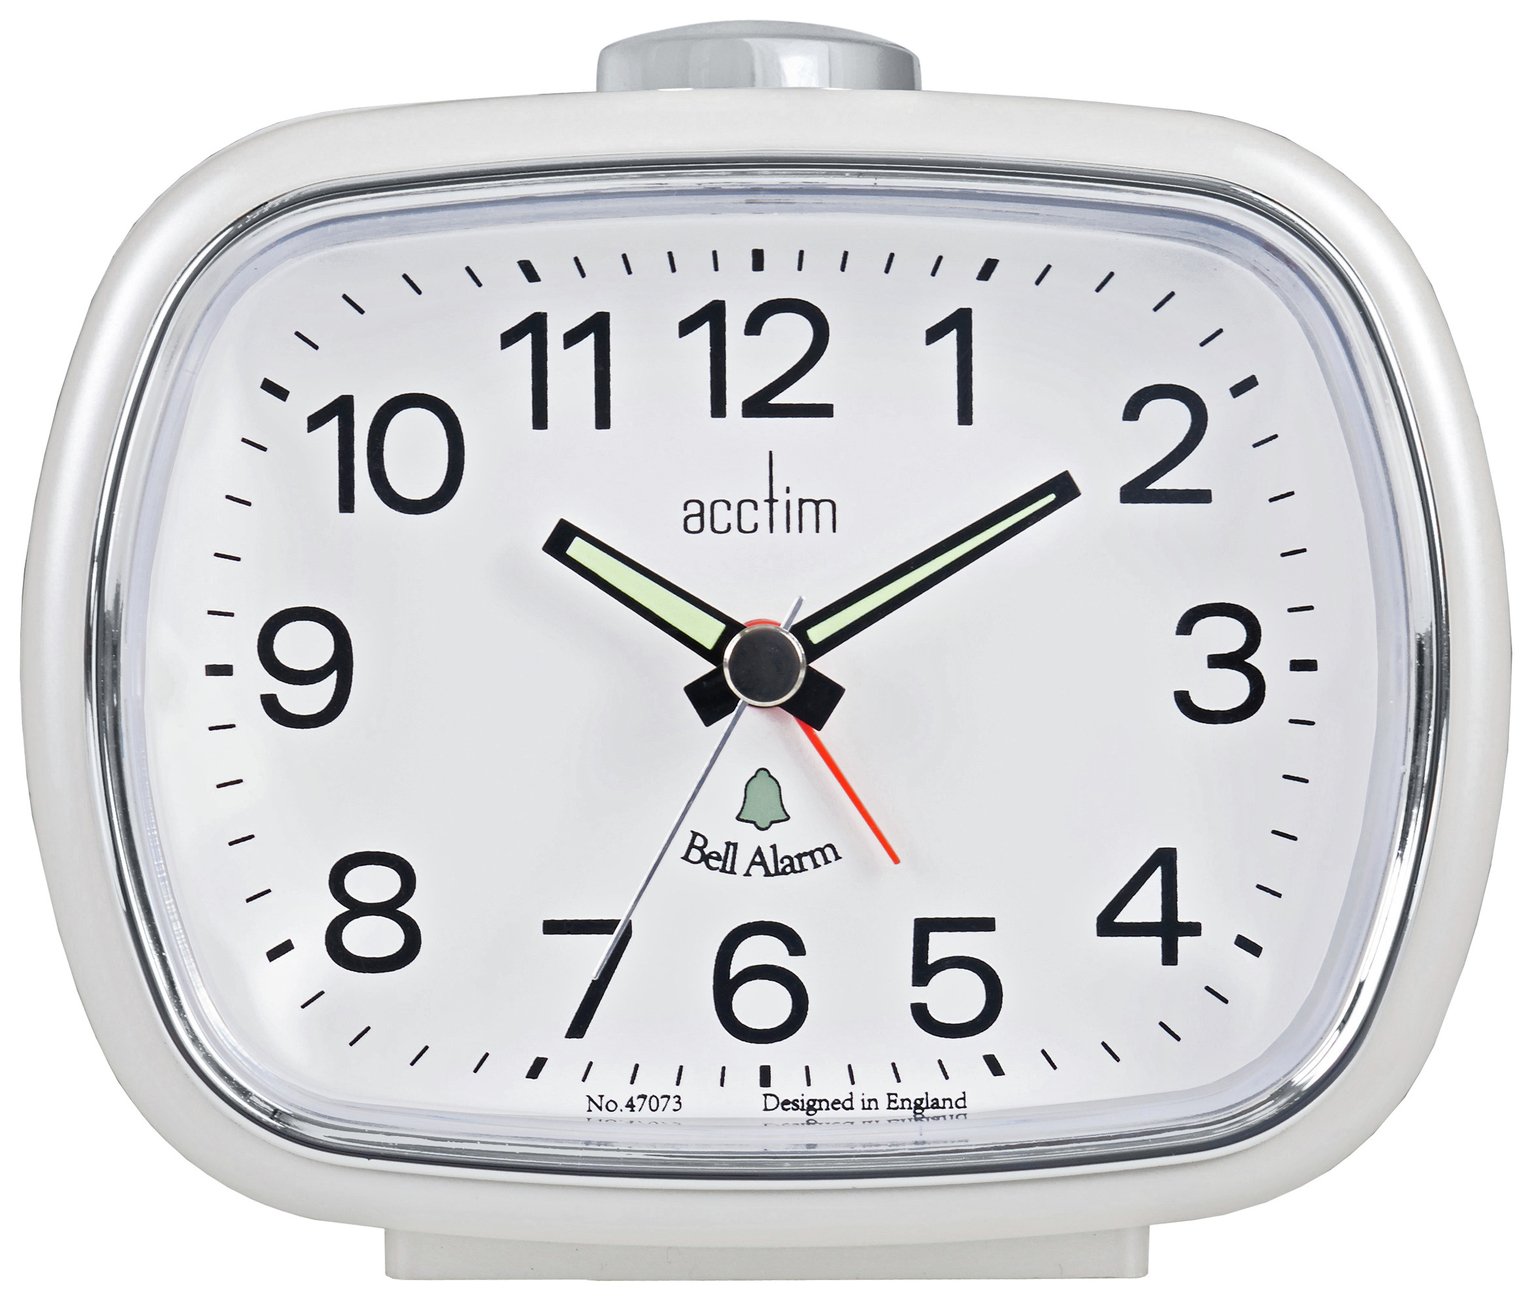 Acctim Camille Pearl Alarm Clock Review